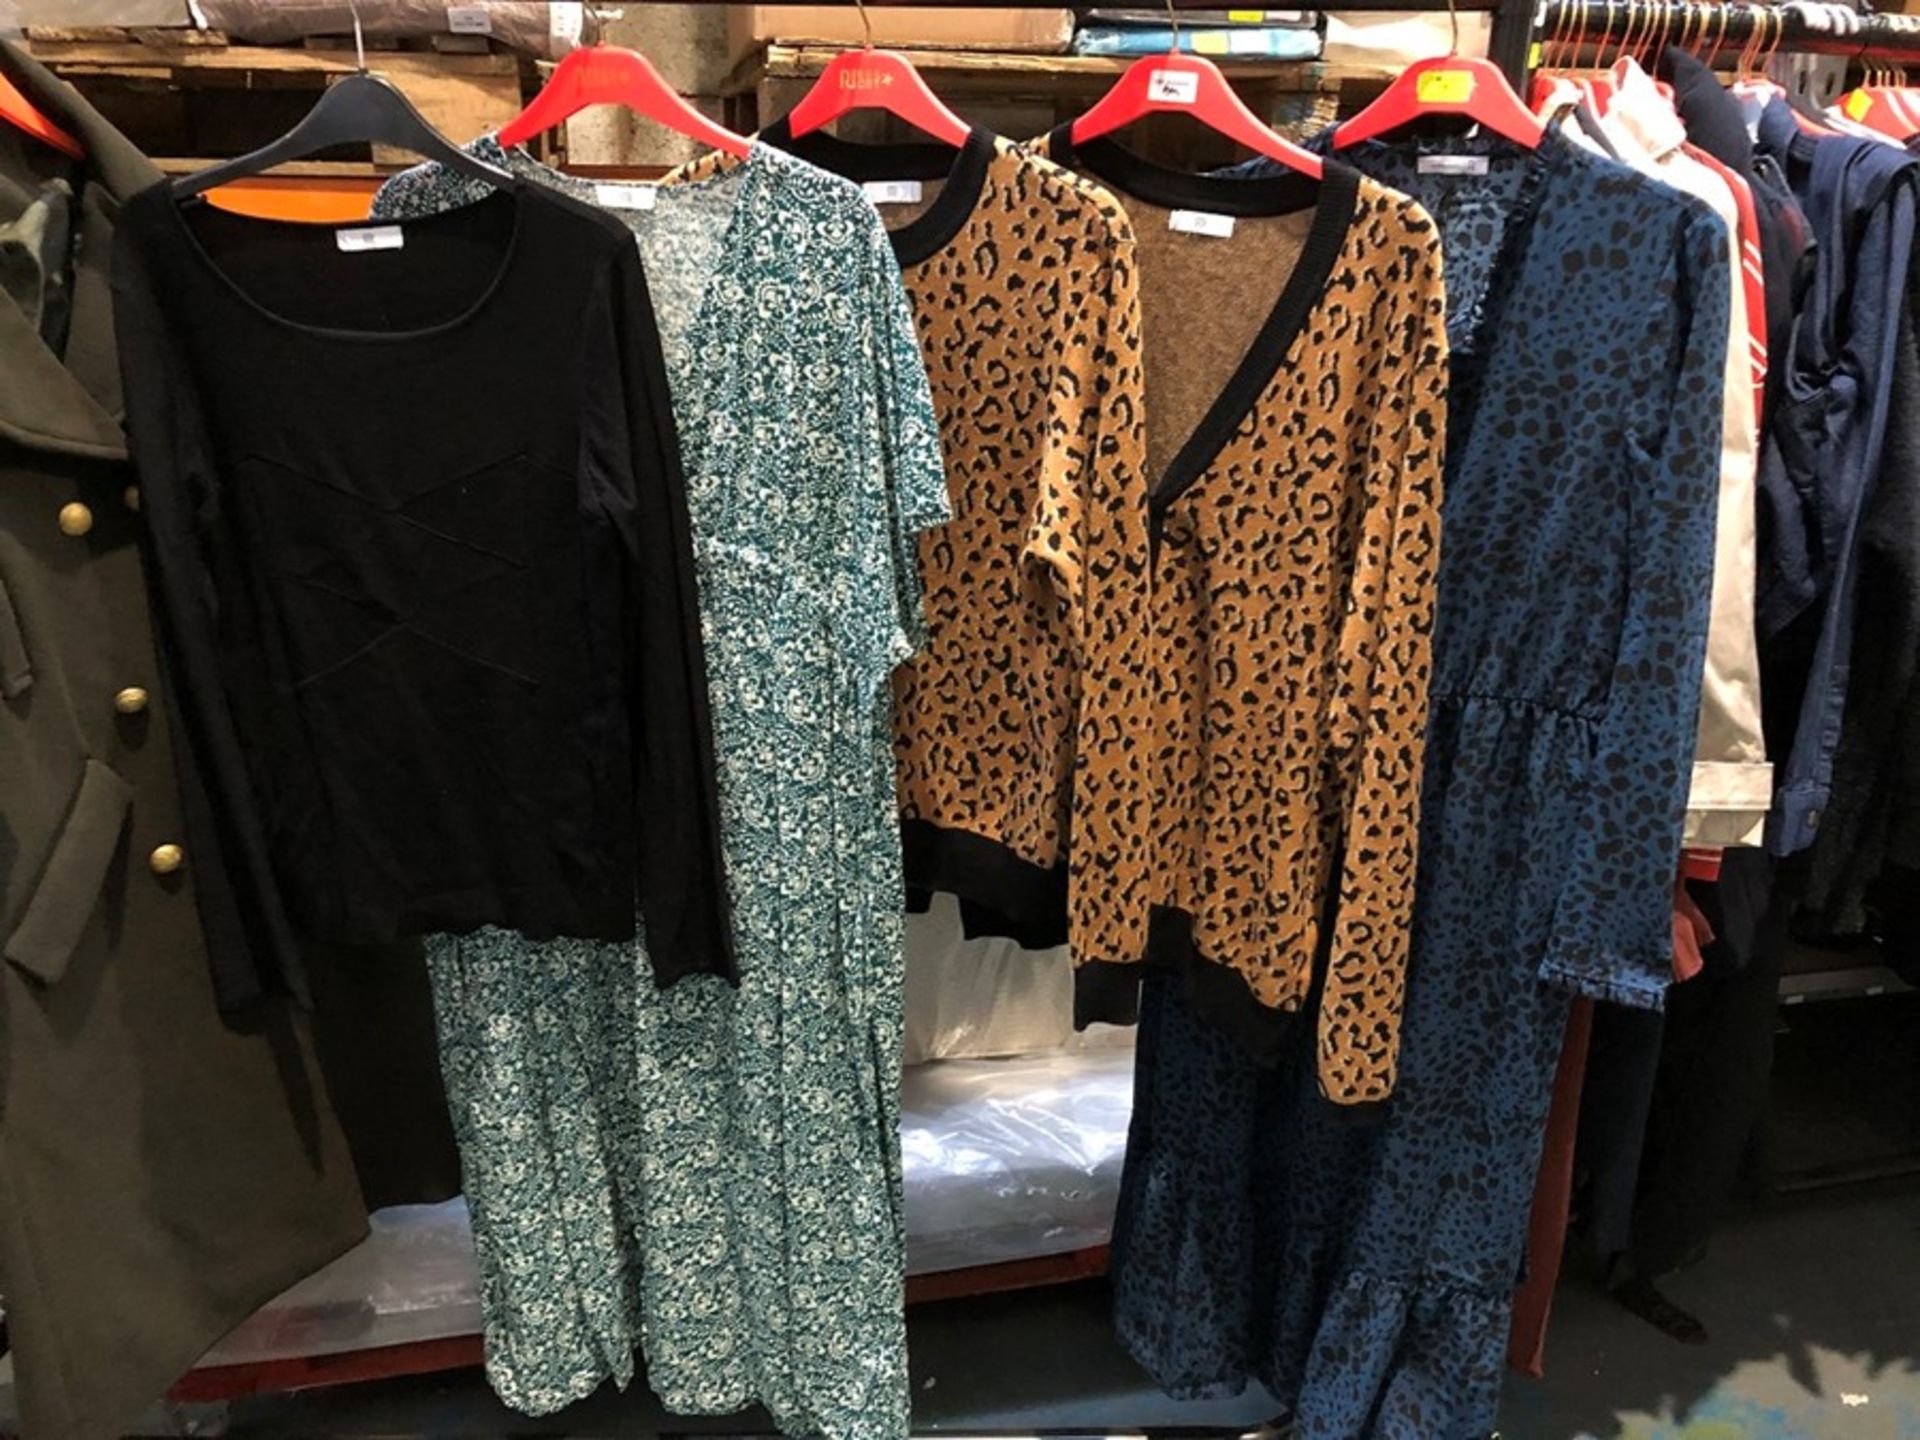 1 LOT TO CONTAIN 5 ITEMS OF LA REDOUTE DESIGNER CLOTHING / UK SIZES FORM LEFT TO RIGHT, L, 14, L,